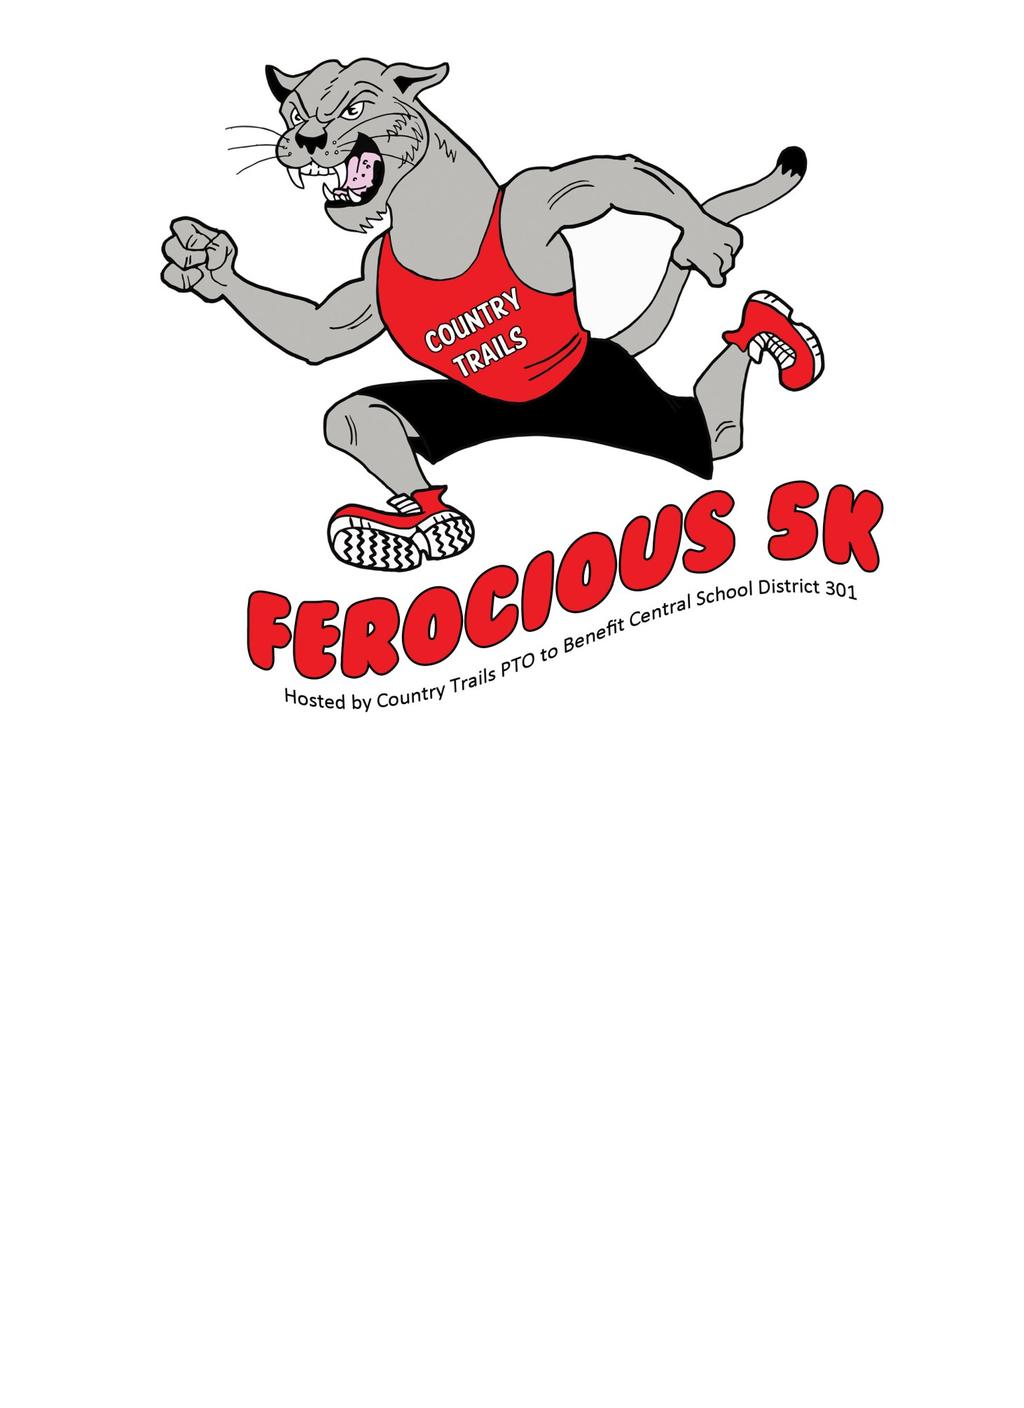 Sunday, May 7, 2017 5K Run/Walk @ 8:00 am Kids 1 Mile Fun Run @ 9:00 am Country Trails PTO is hosting a Ferocious 5K and the best part is your school can earn money too!